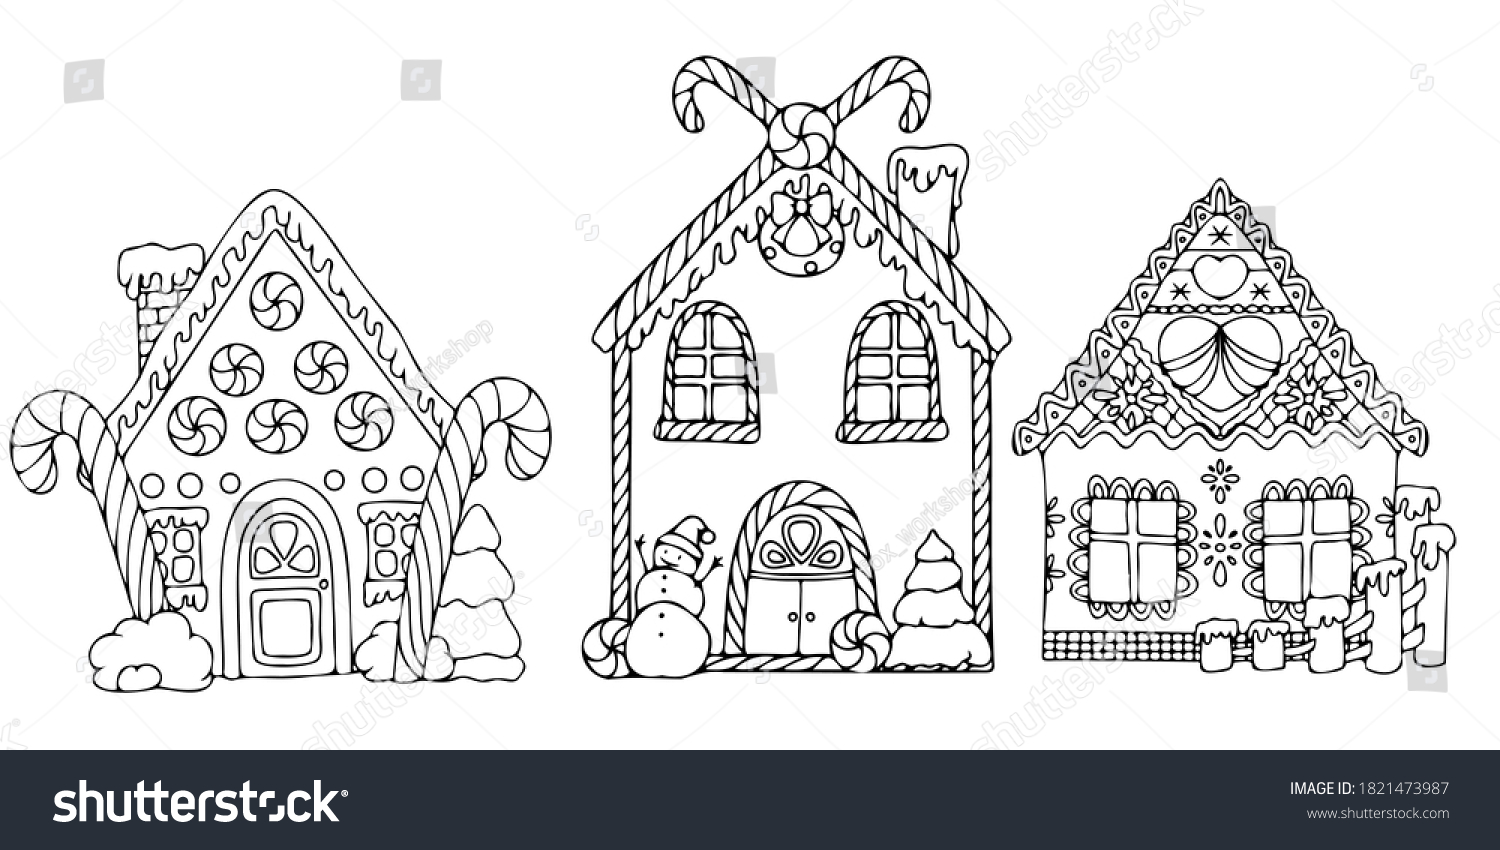 1,607 Gingerbread House Sketch Images, Stock Photos & Vectors ...